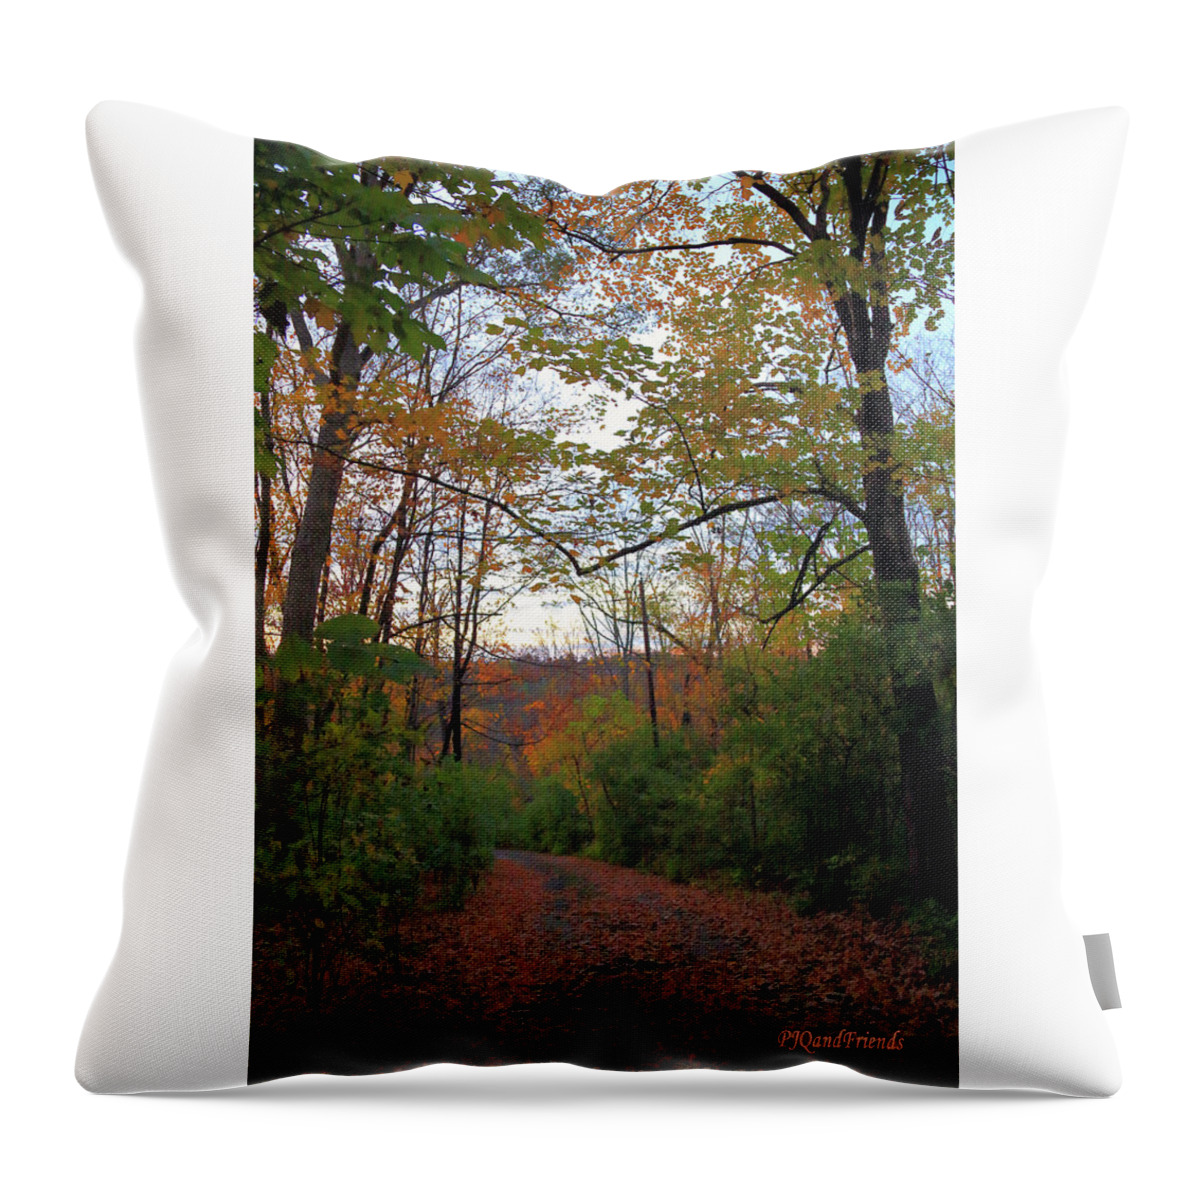 Golden Hour Of Autumn Throw Pillow featuring the photograph Golden Hour of Autumn by PJQandFriends Photography